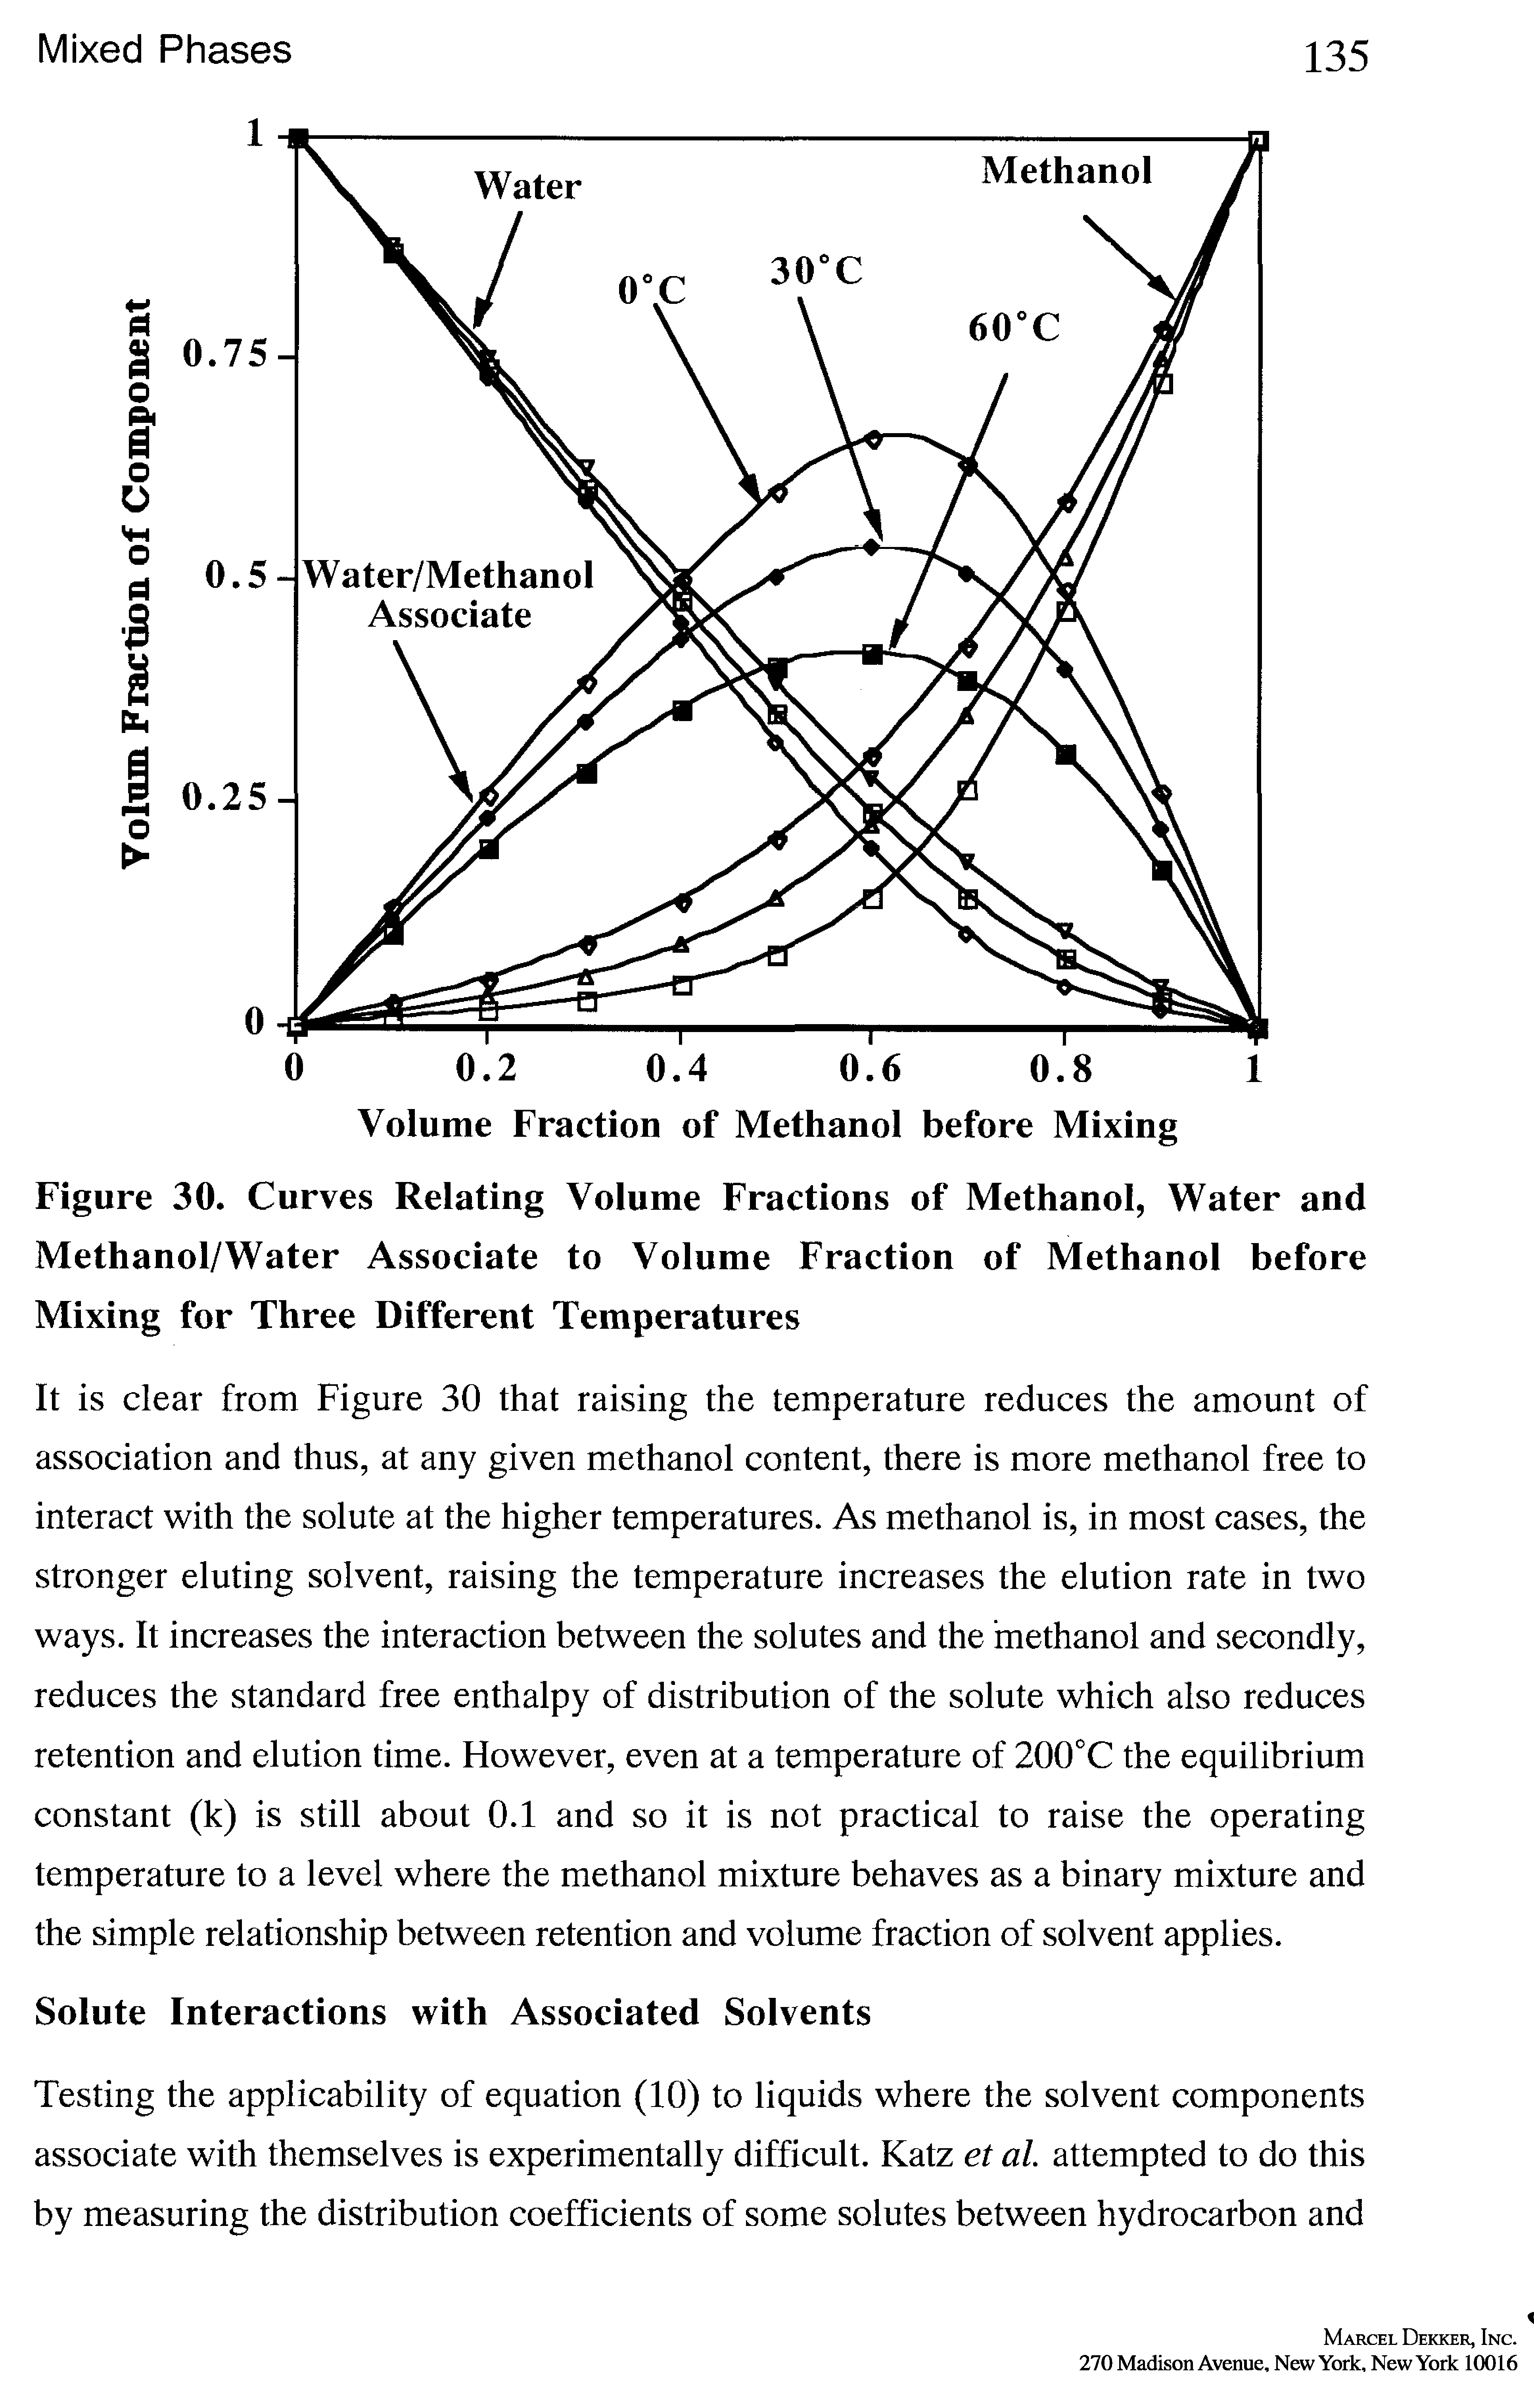 Figure 30. Curves Relating Volume Fractions of Methanol, Water and Methanol/Water Associate to Volume Fraction of Methanol before Mixing for Three Different Temperatures...